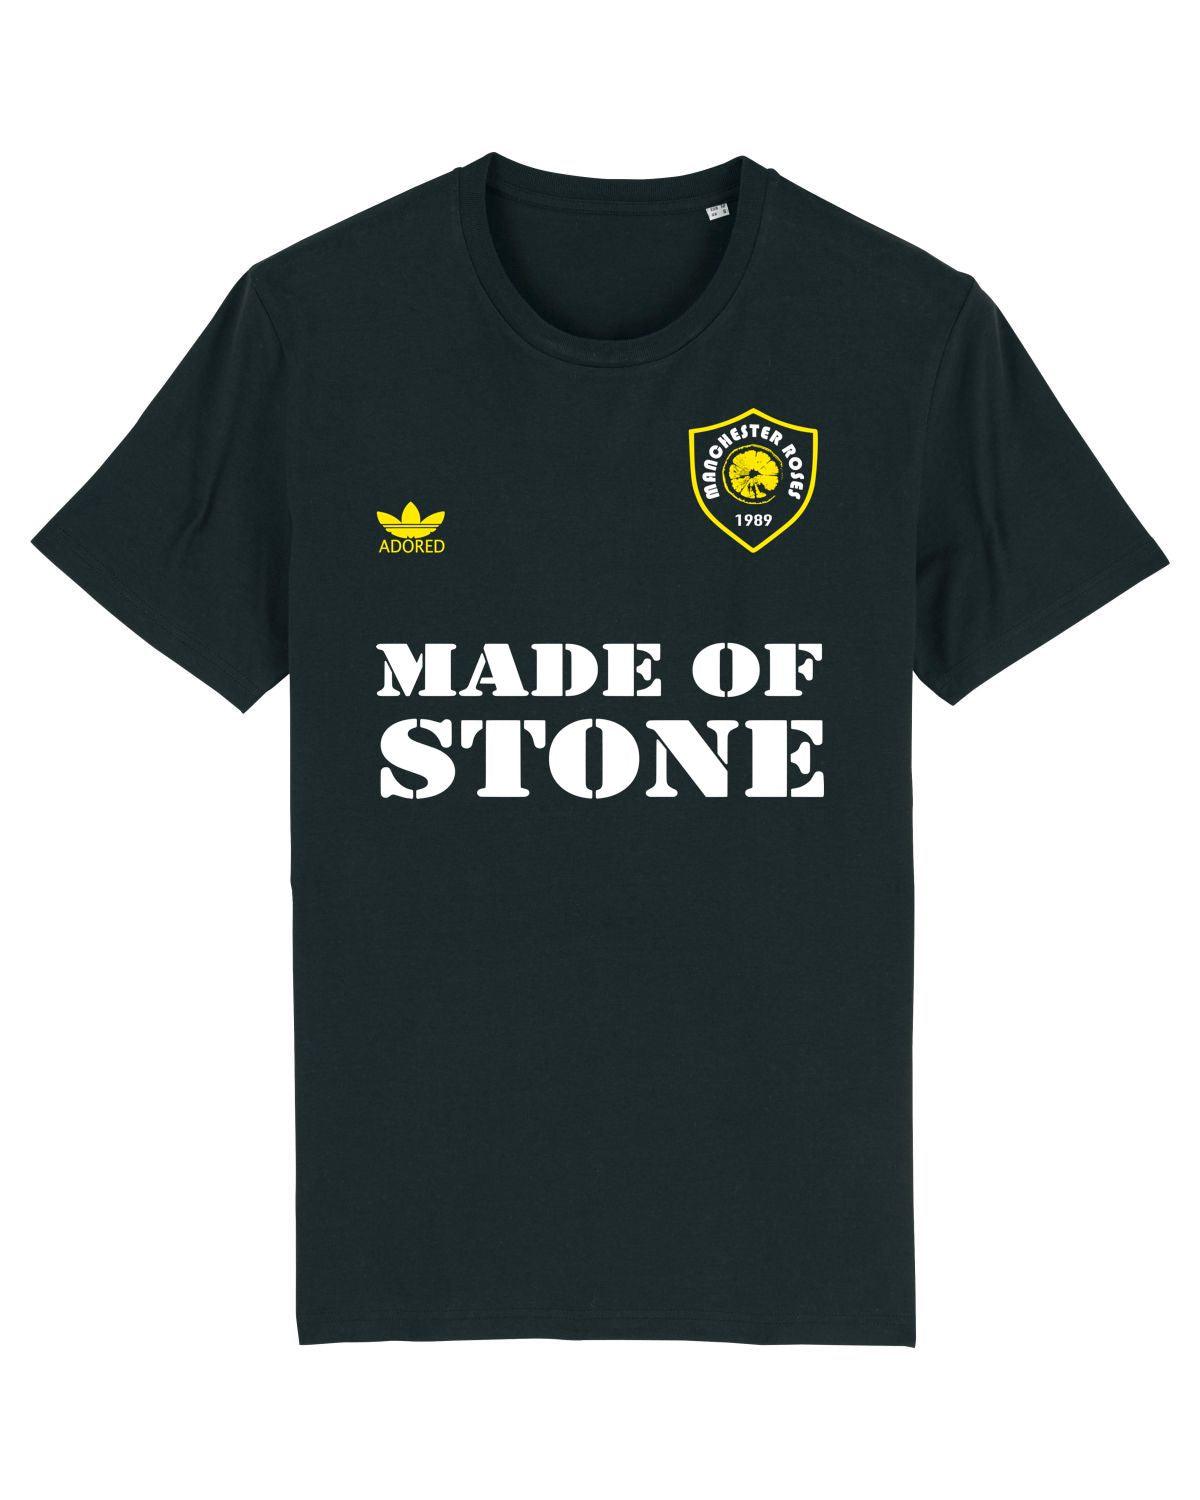 MANCHESTER ROSES: T-Shirt Inspired by The Stone Roses & Football : Sound is Colour